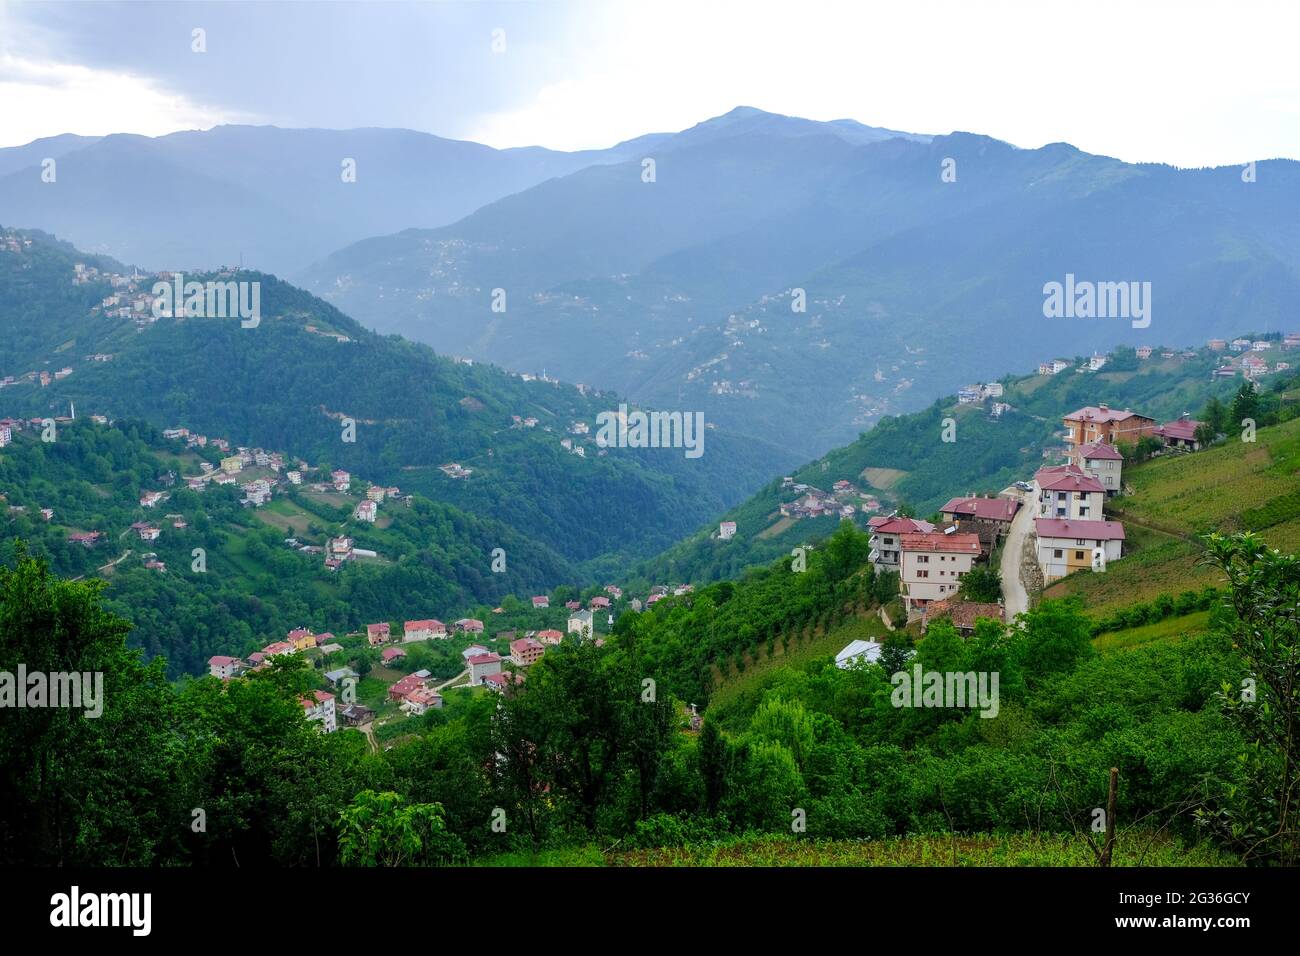 The villages in Çaykara district of Trabzon, which has sloping and mountainous lands, were established on these slopes. Stock Photo